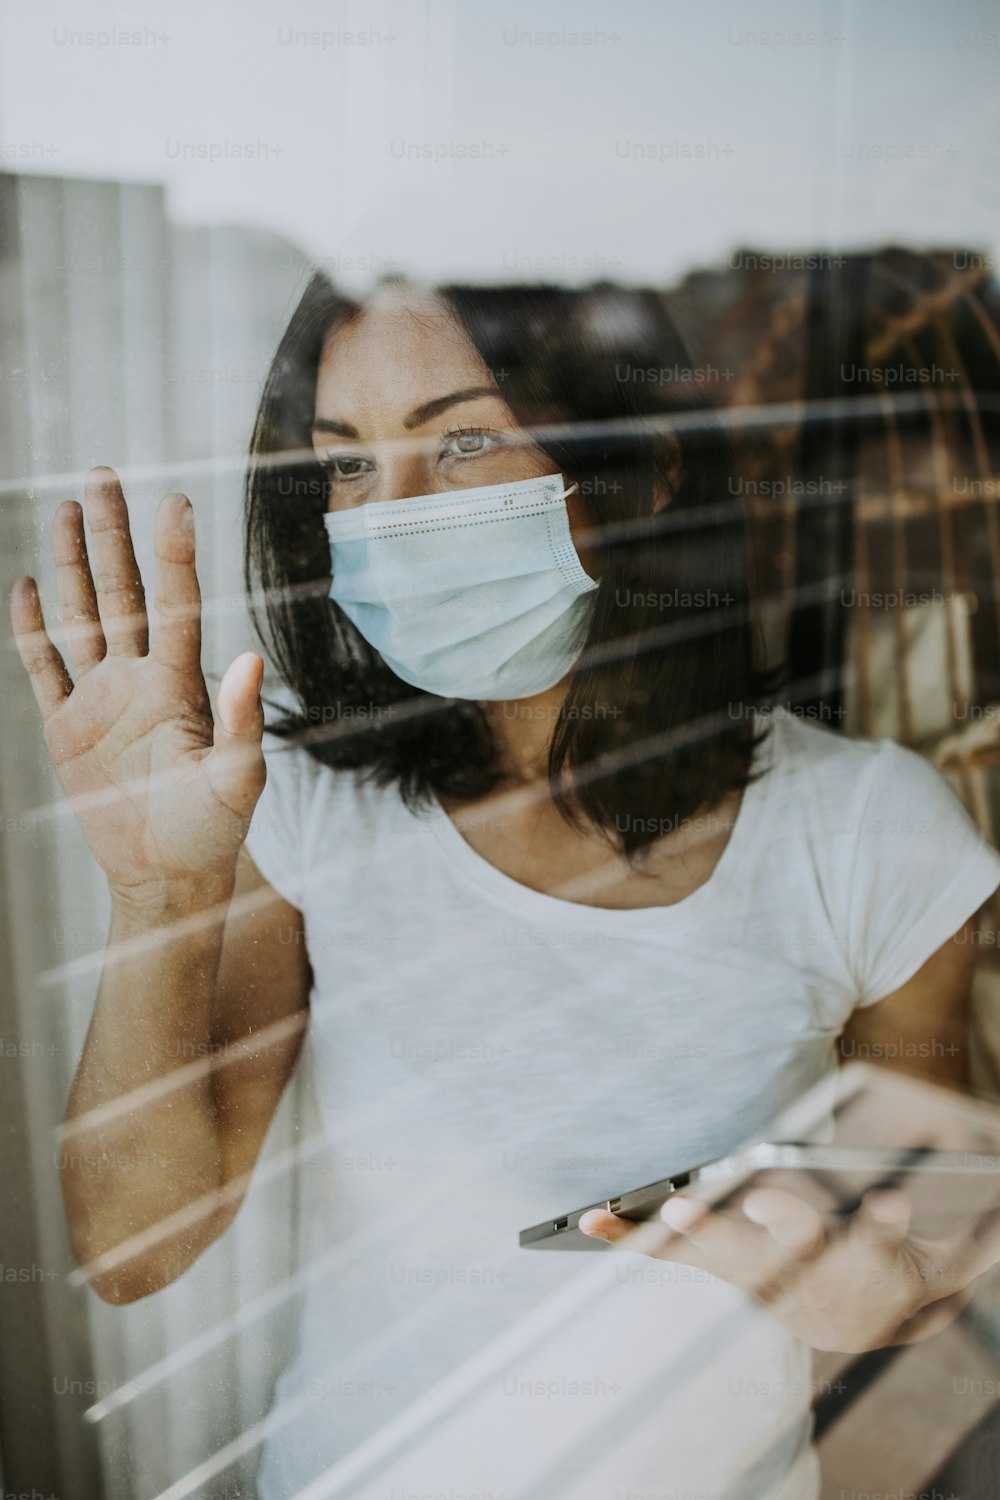 A frightened and worried woman looks out the window of her apartment or hospital room. She wears a protective mask on her face for fear of a dangerous and contagious virus. Quarantine and social distancing concept.